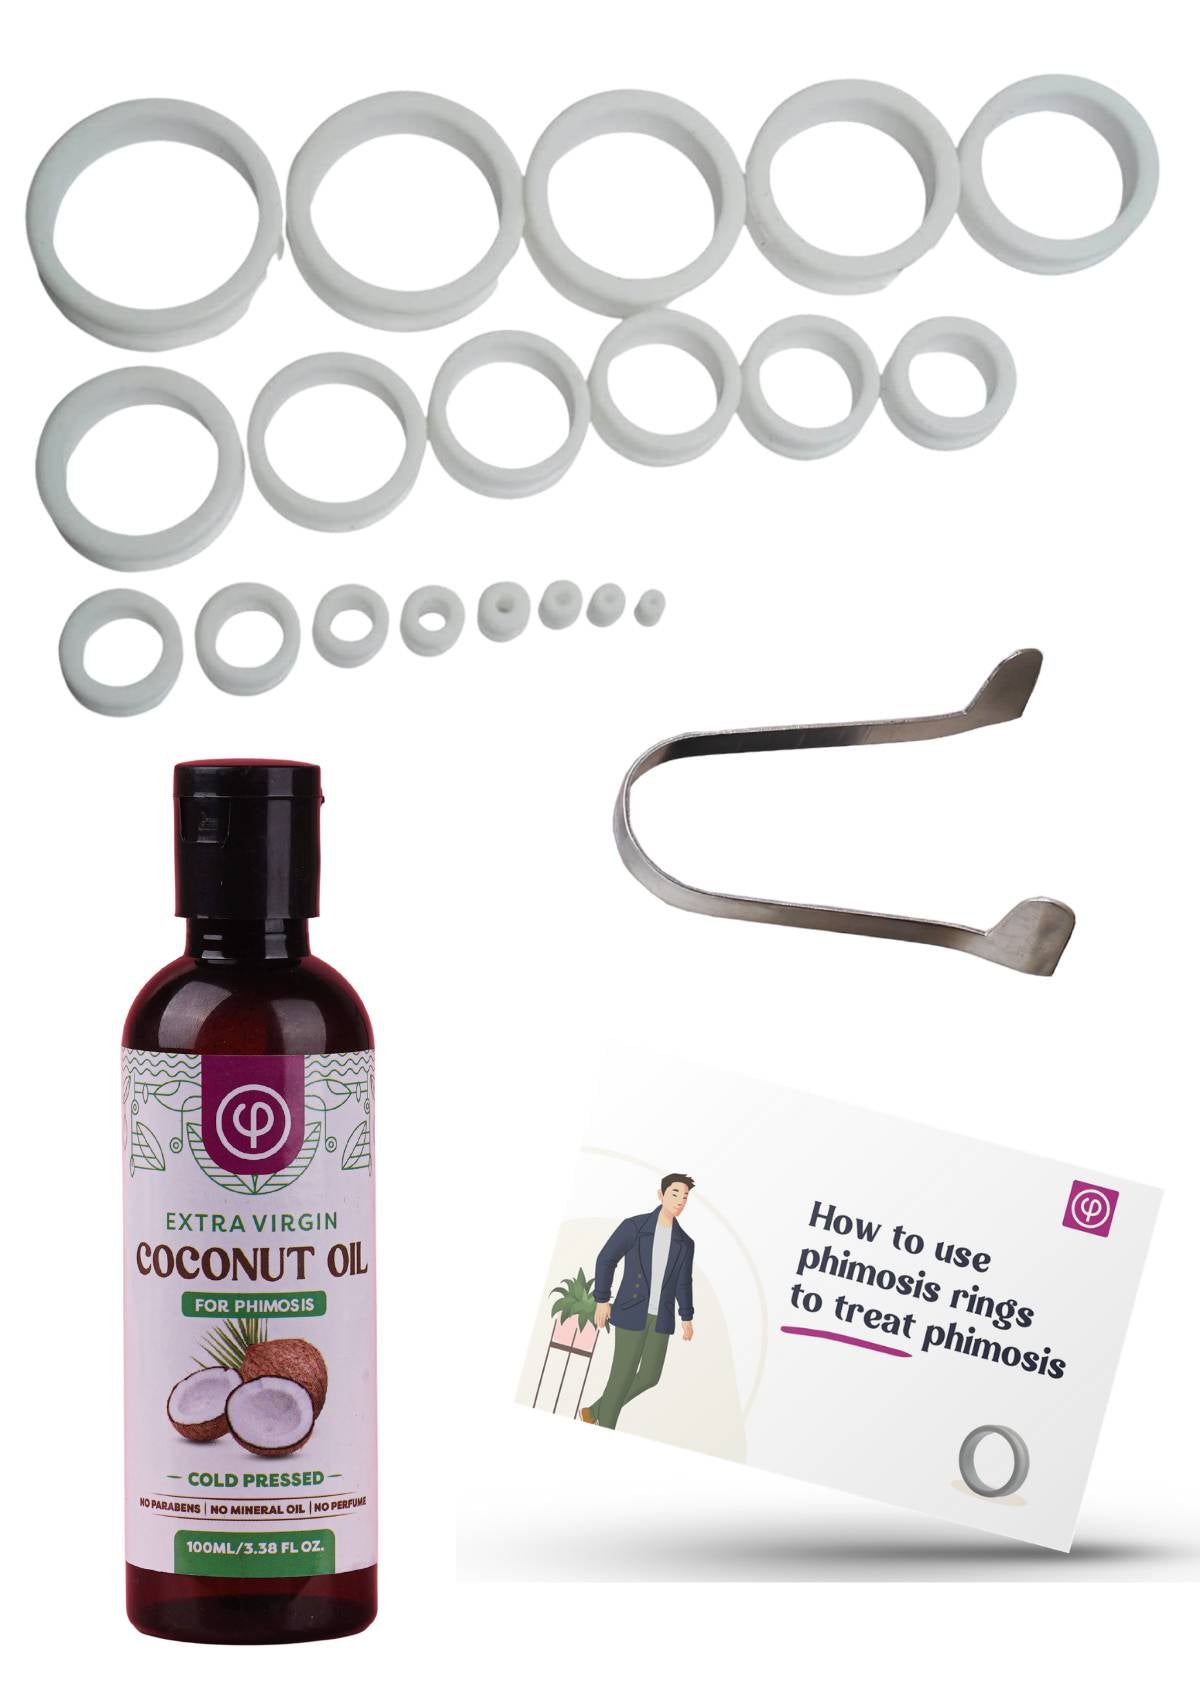 Phimostretch Phimosis Stretcher Rings Kit - 20 Rings from 3mm to